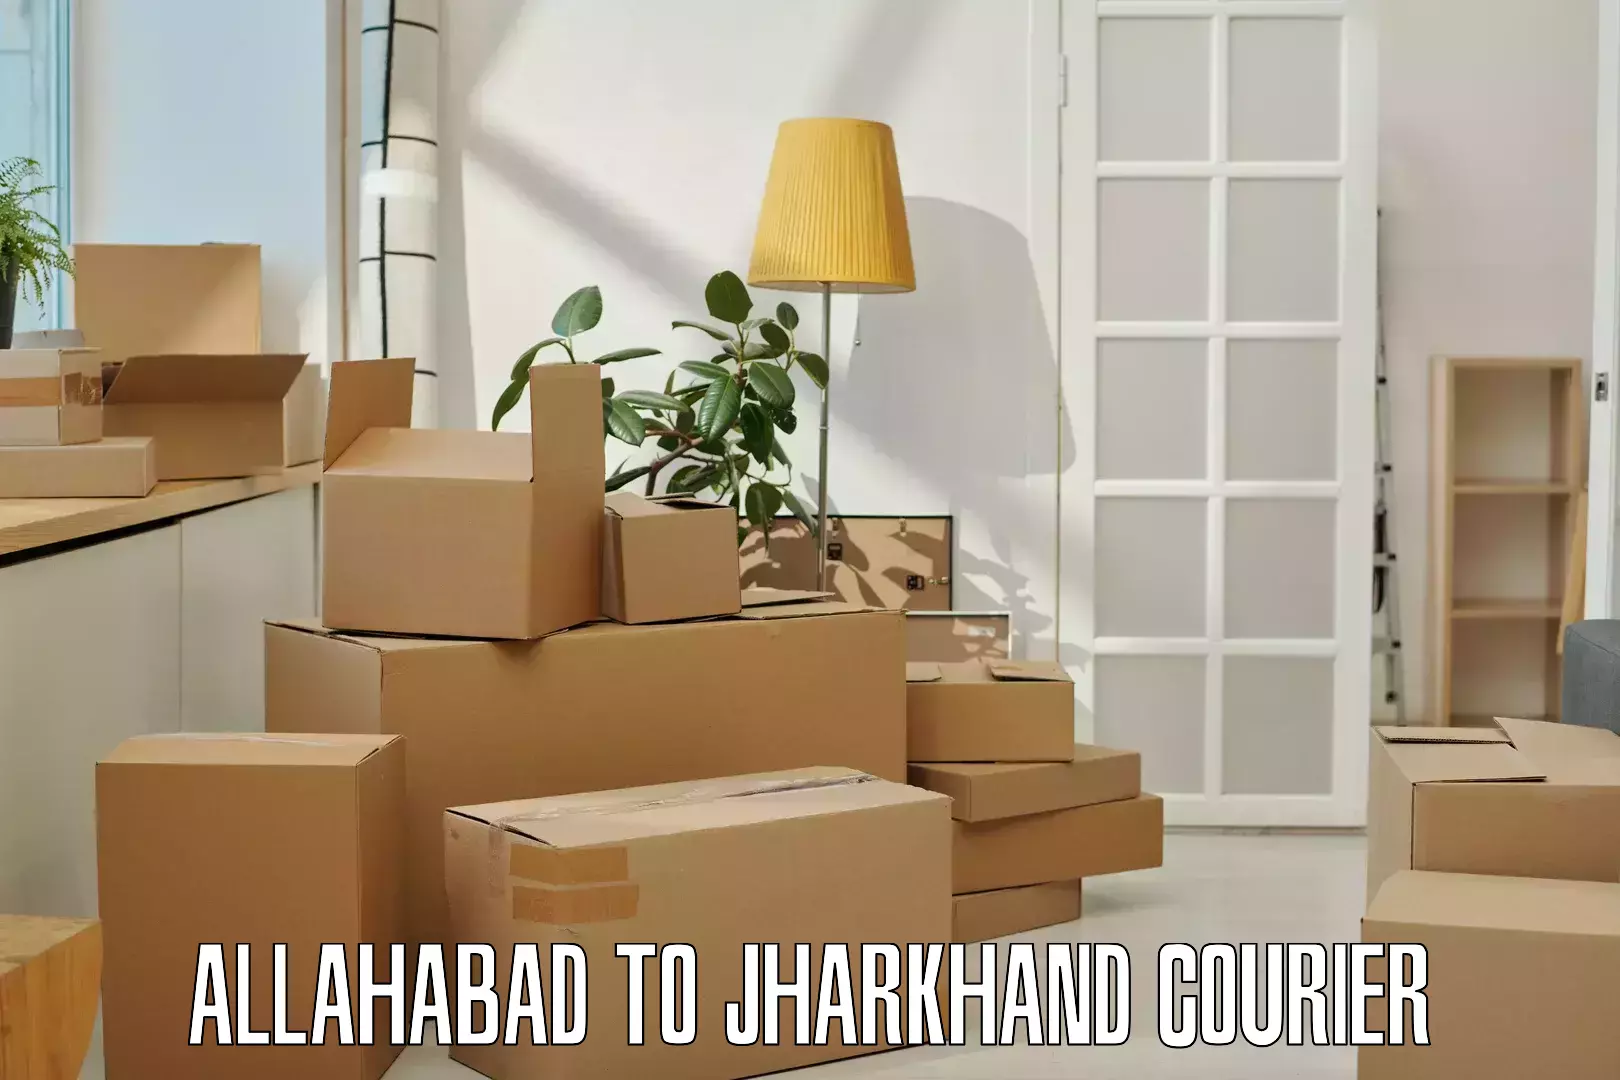 24-hour courier service Allahabad to Jamtara